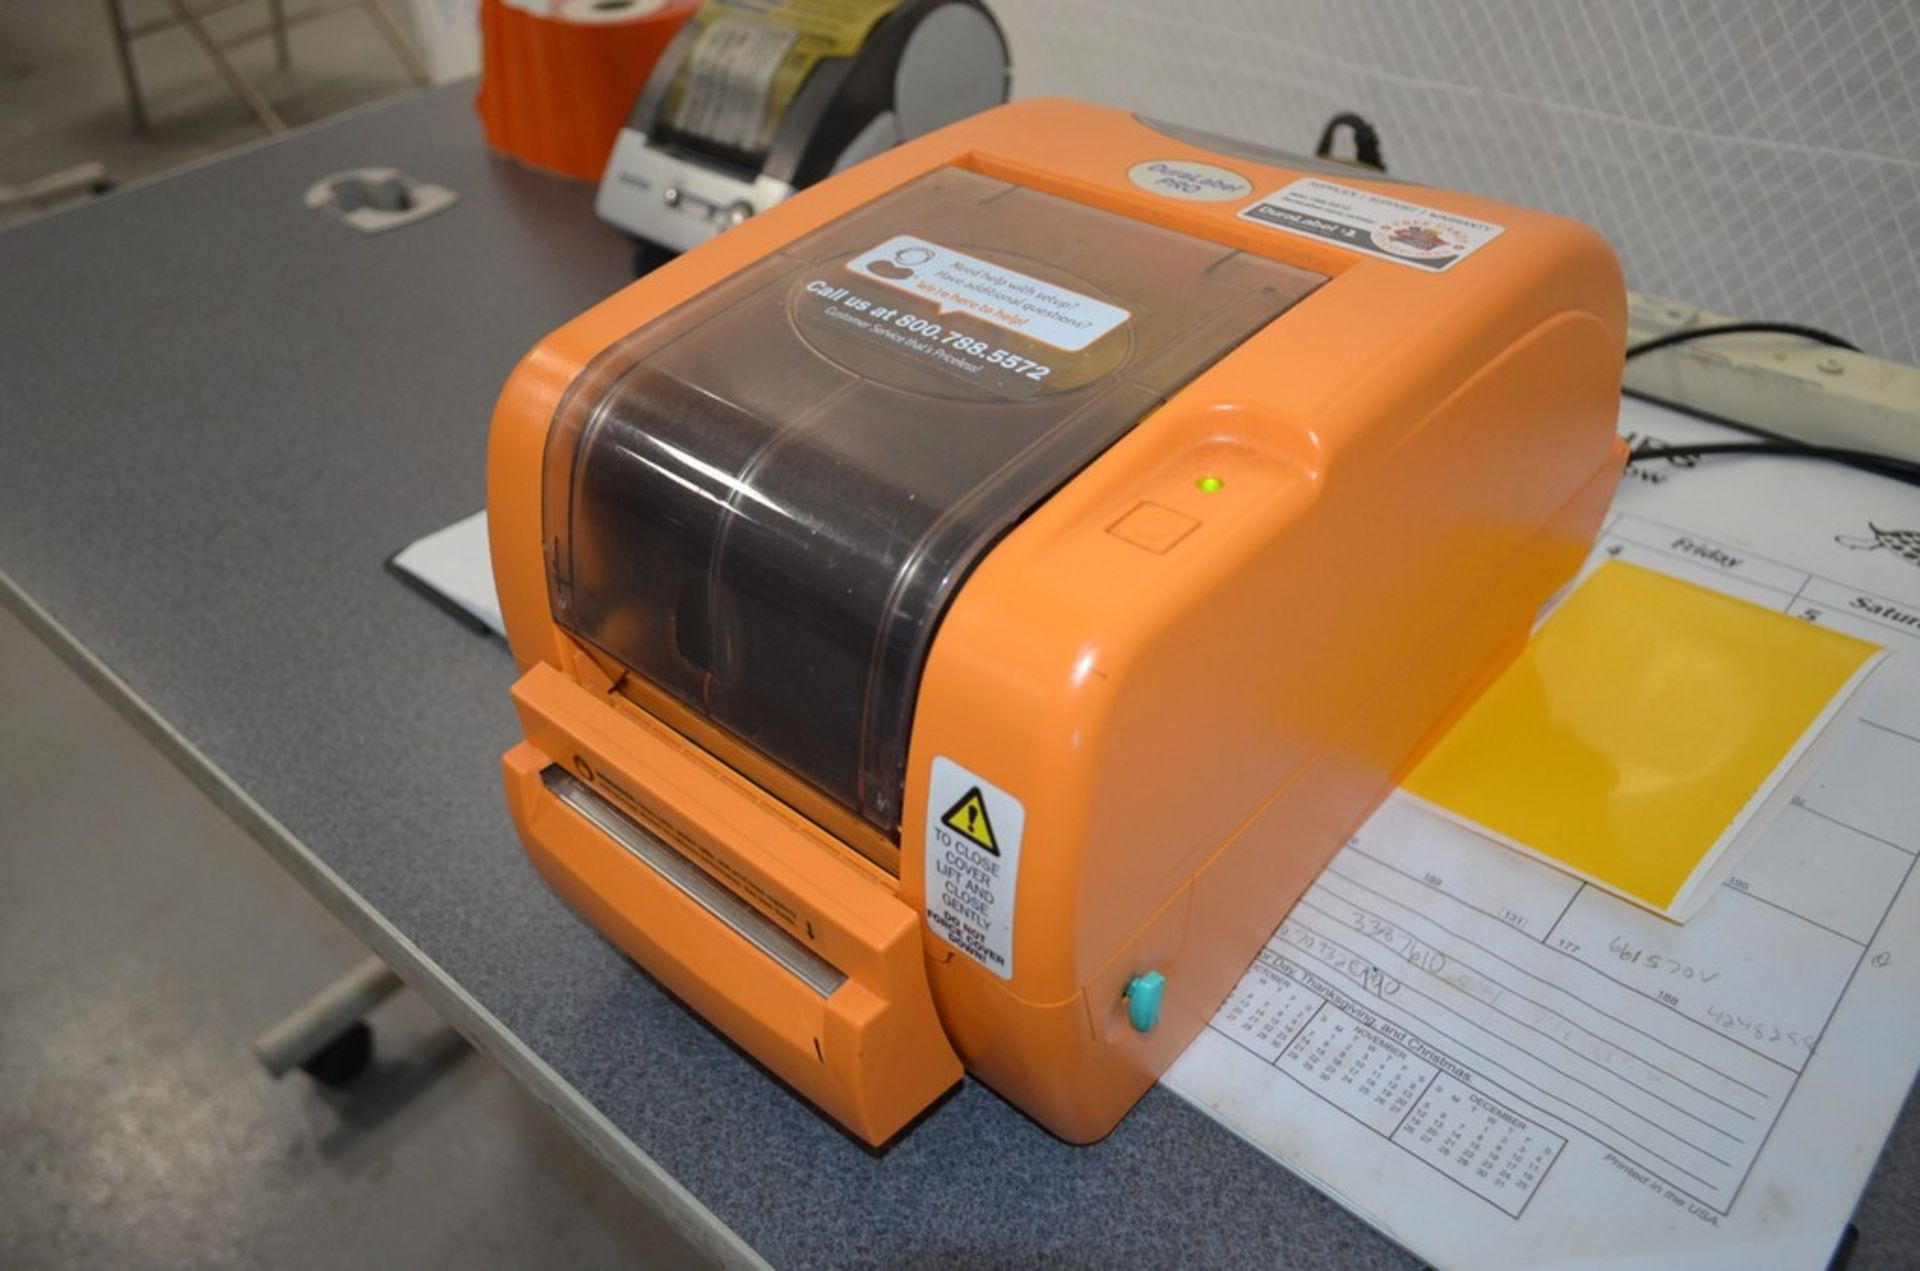 Lot - Table with Dura Label Pro and Brother P-Touch QL-500 Label Printer (No Laptop or Monitor); - Image 2 of 7